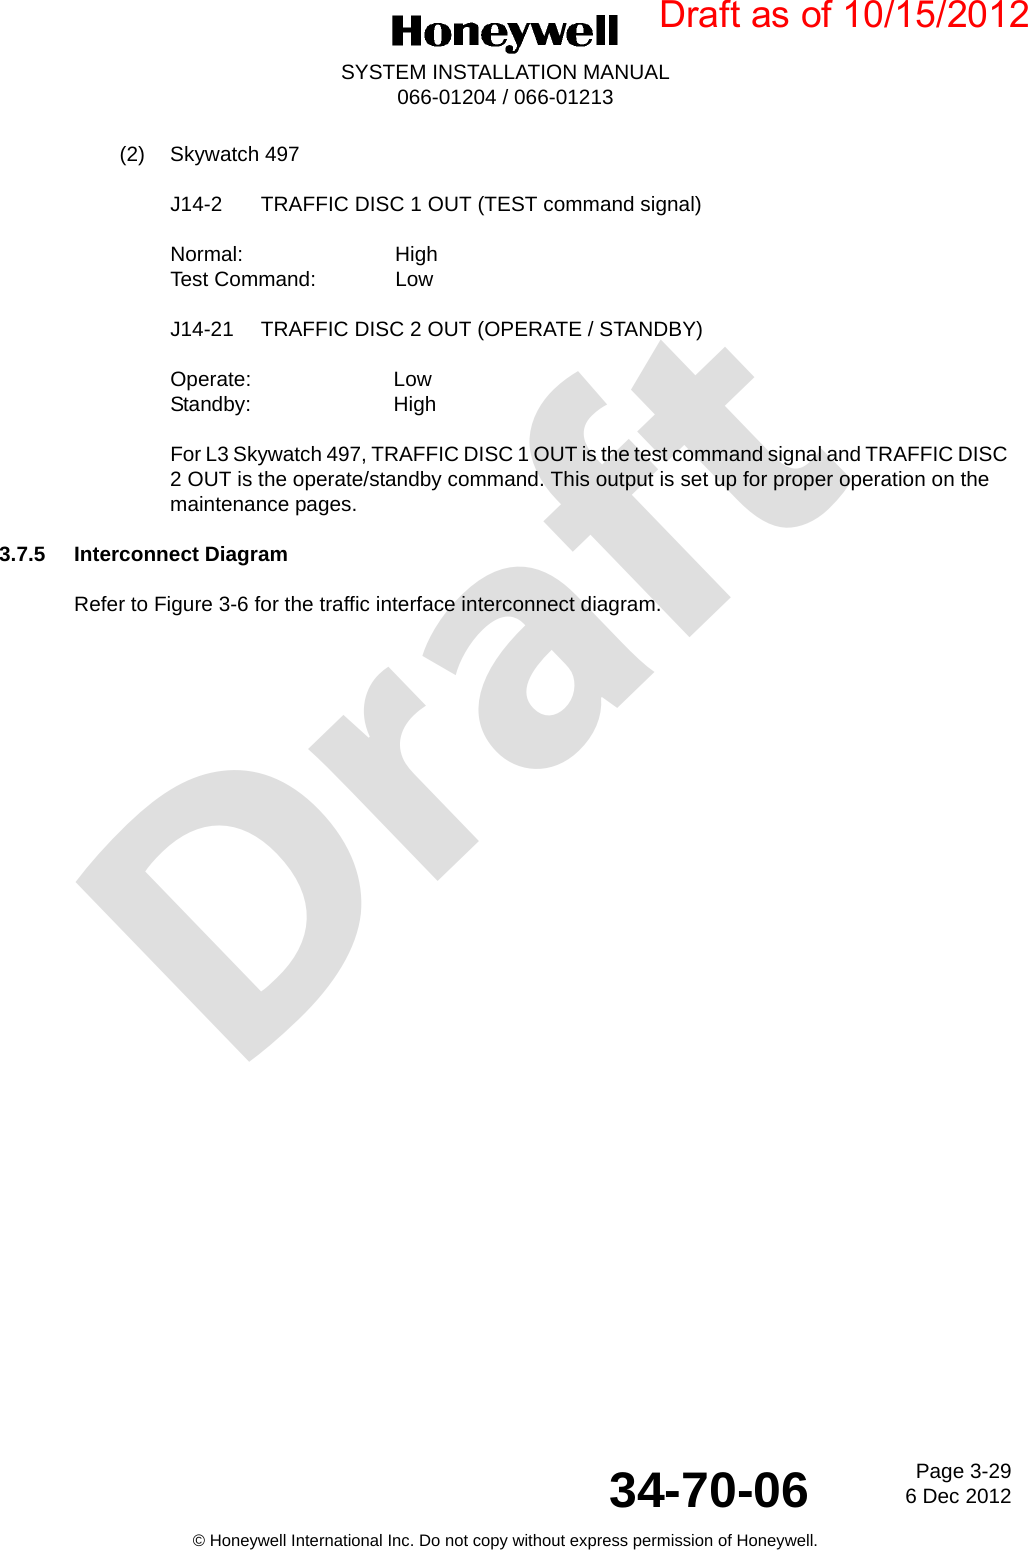 DraftPage 3-296 Dec 201234-70-06SYSTEM INSTALLATION MANUAL066-01204 / 066-01213© Honeywell International Inc. Do not copy without express permission of Honeywell.(2) Skywatch 497J14-2 TRAFFIC DISC 1 OUT (TEST command signal)Normal: HighTest Command:  LowJ14-21 TRAFFIC DISC 2 OUT (OPERATE / STANDBY)Operate: LowStandby: HighFor L3 Skywatch 497, TRAFFIC DISC 1 OUT is the test command signal and TRAFFIC DISC 2 OUT is the operate/standby command. This output is set up for proper operation on the maintenance pages.3.7.5 Interconnect DiagramRefer to Figure 3-6 for the traffic interface interconnect diagram.Draft as of 10/15/2012